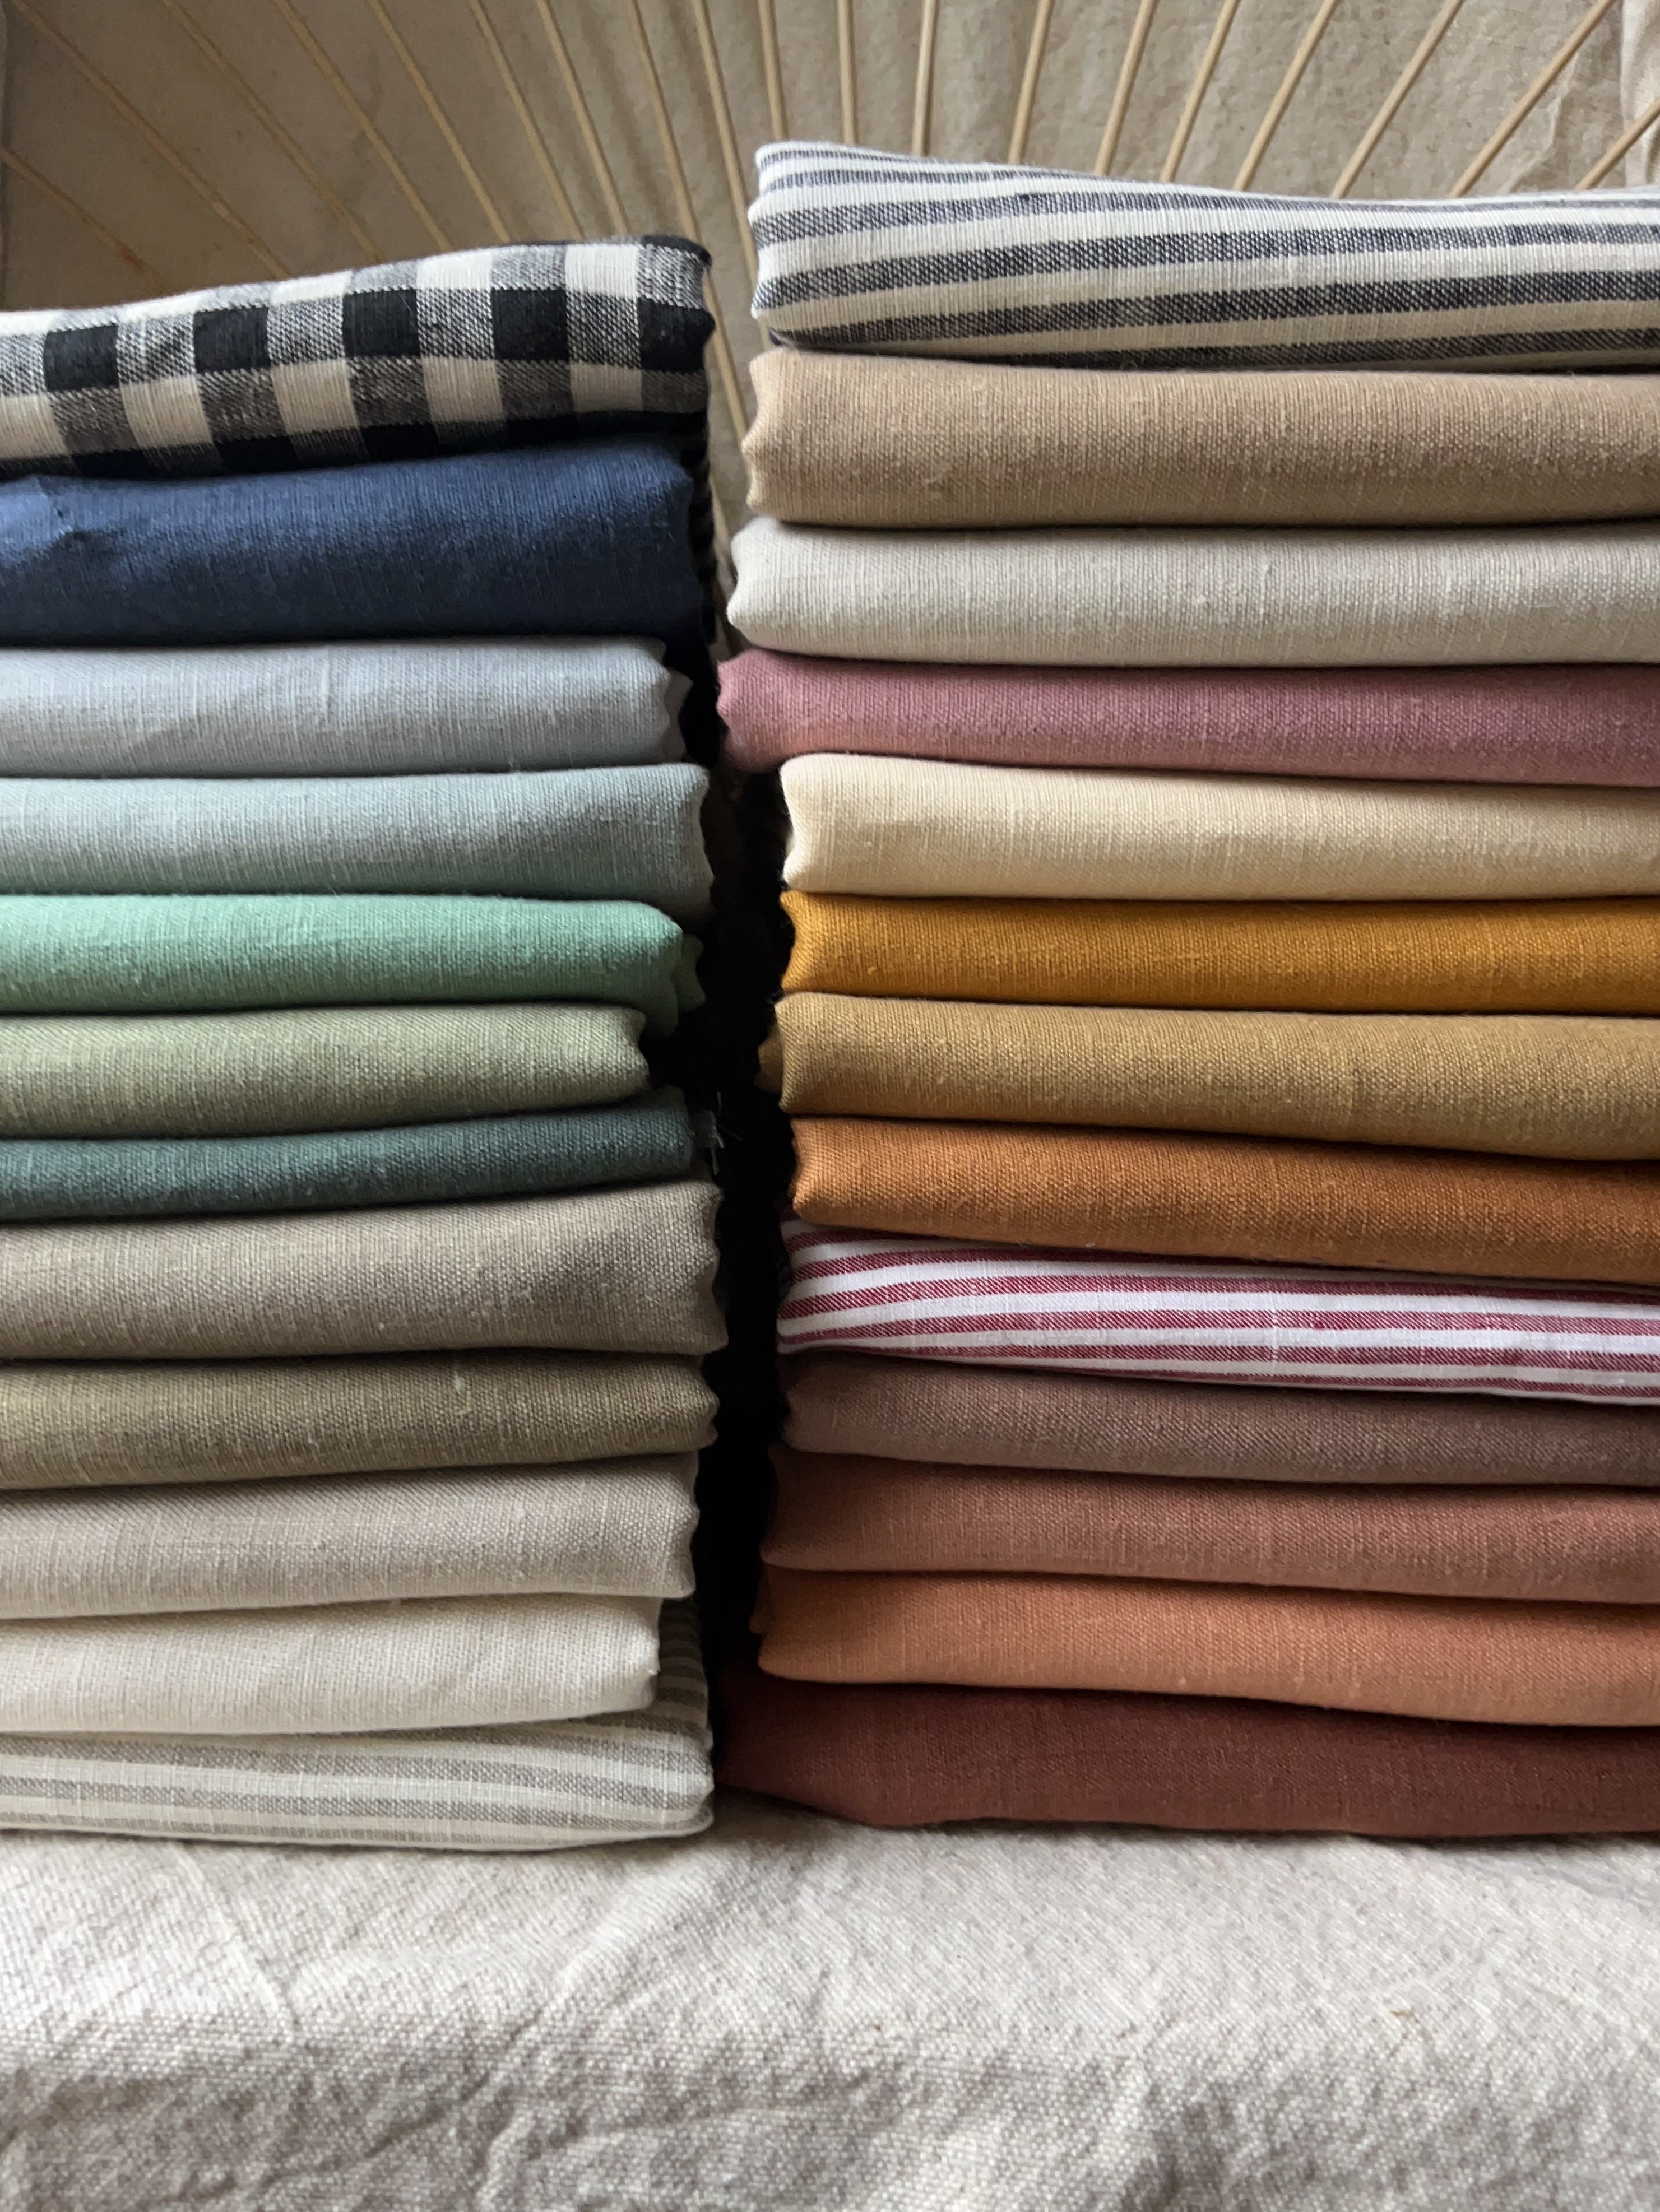 Soft and Skin-friendly Linen Fabric for Dress Lining - OneYard